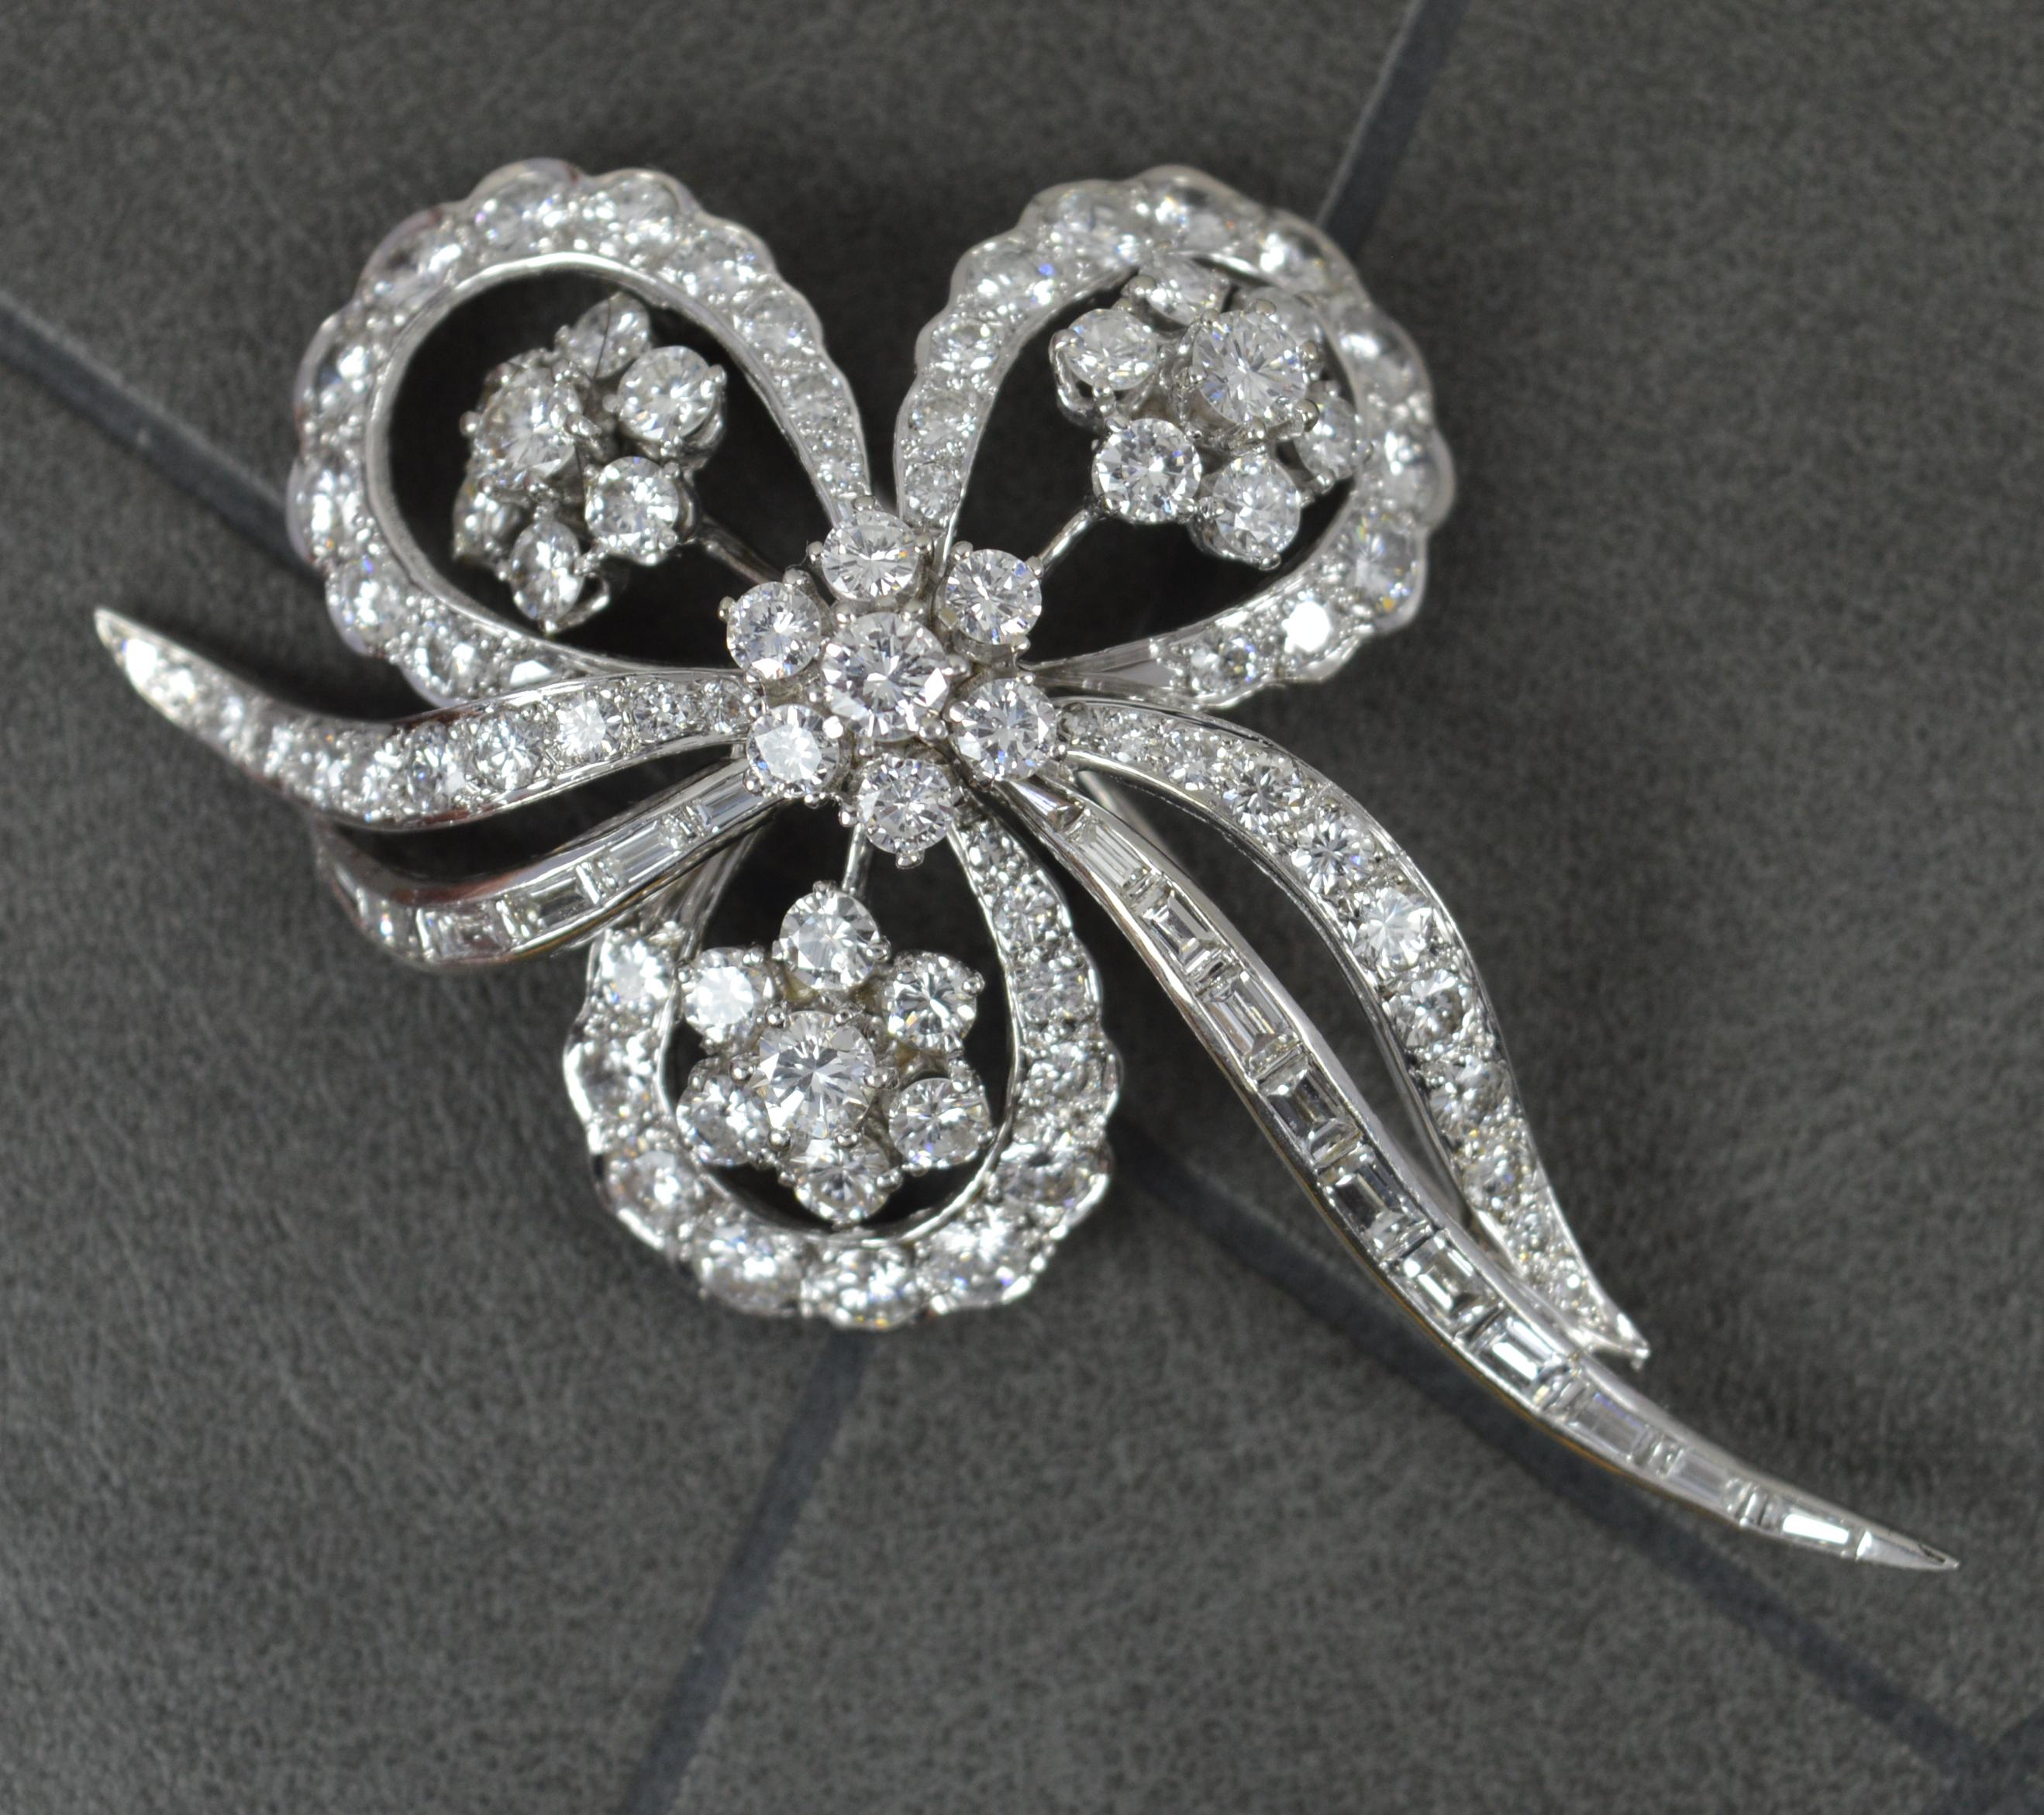 5.5ct Vs Diamond 18ct White Gold Flower Floral Spray Brooch In Good Condition For Sale In St Helens, GB